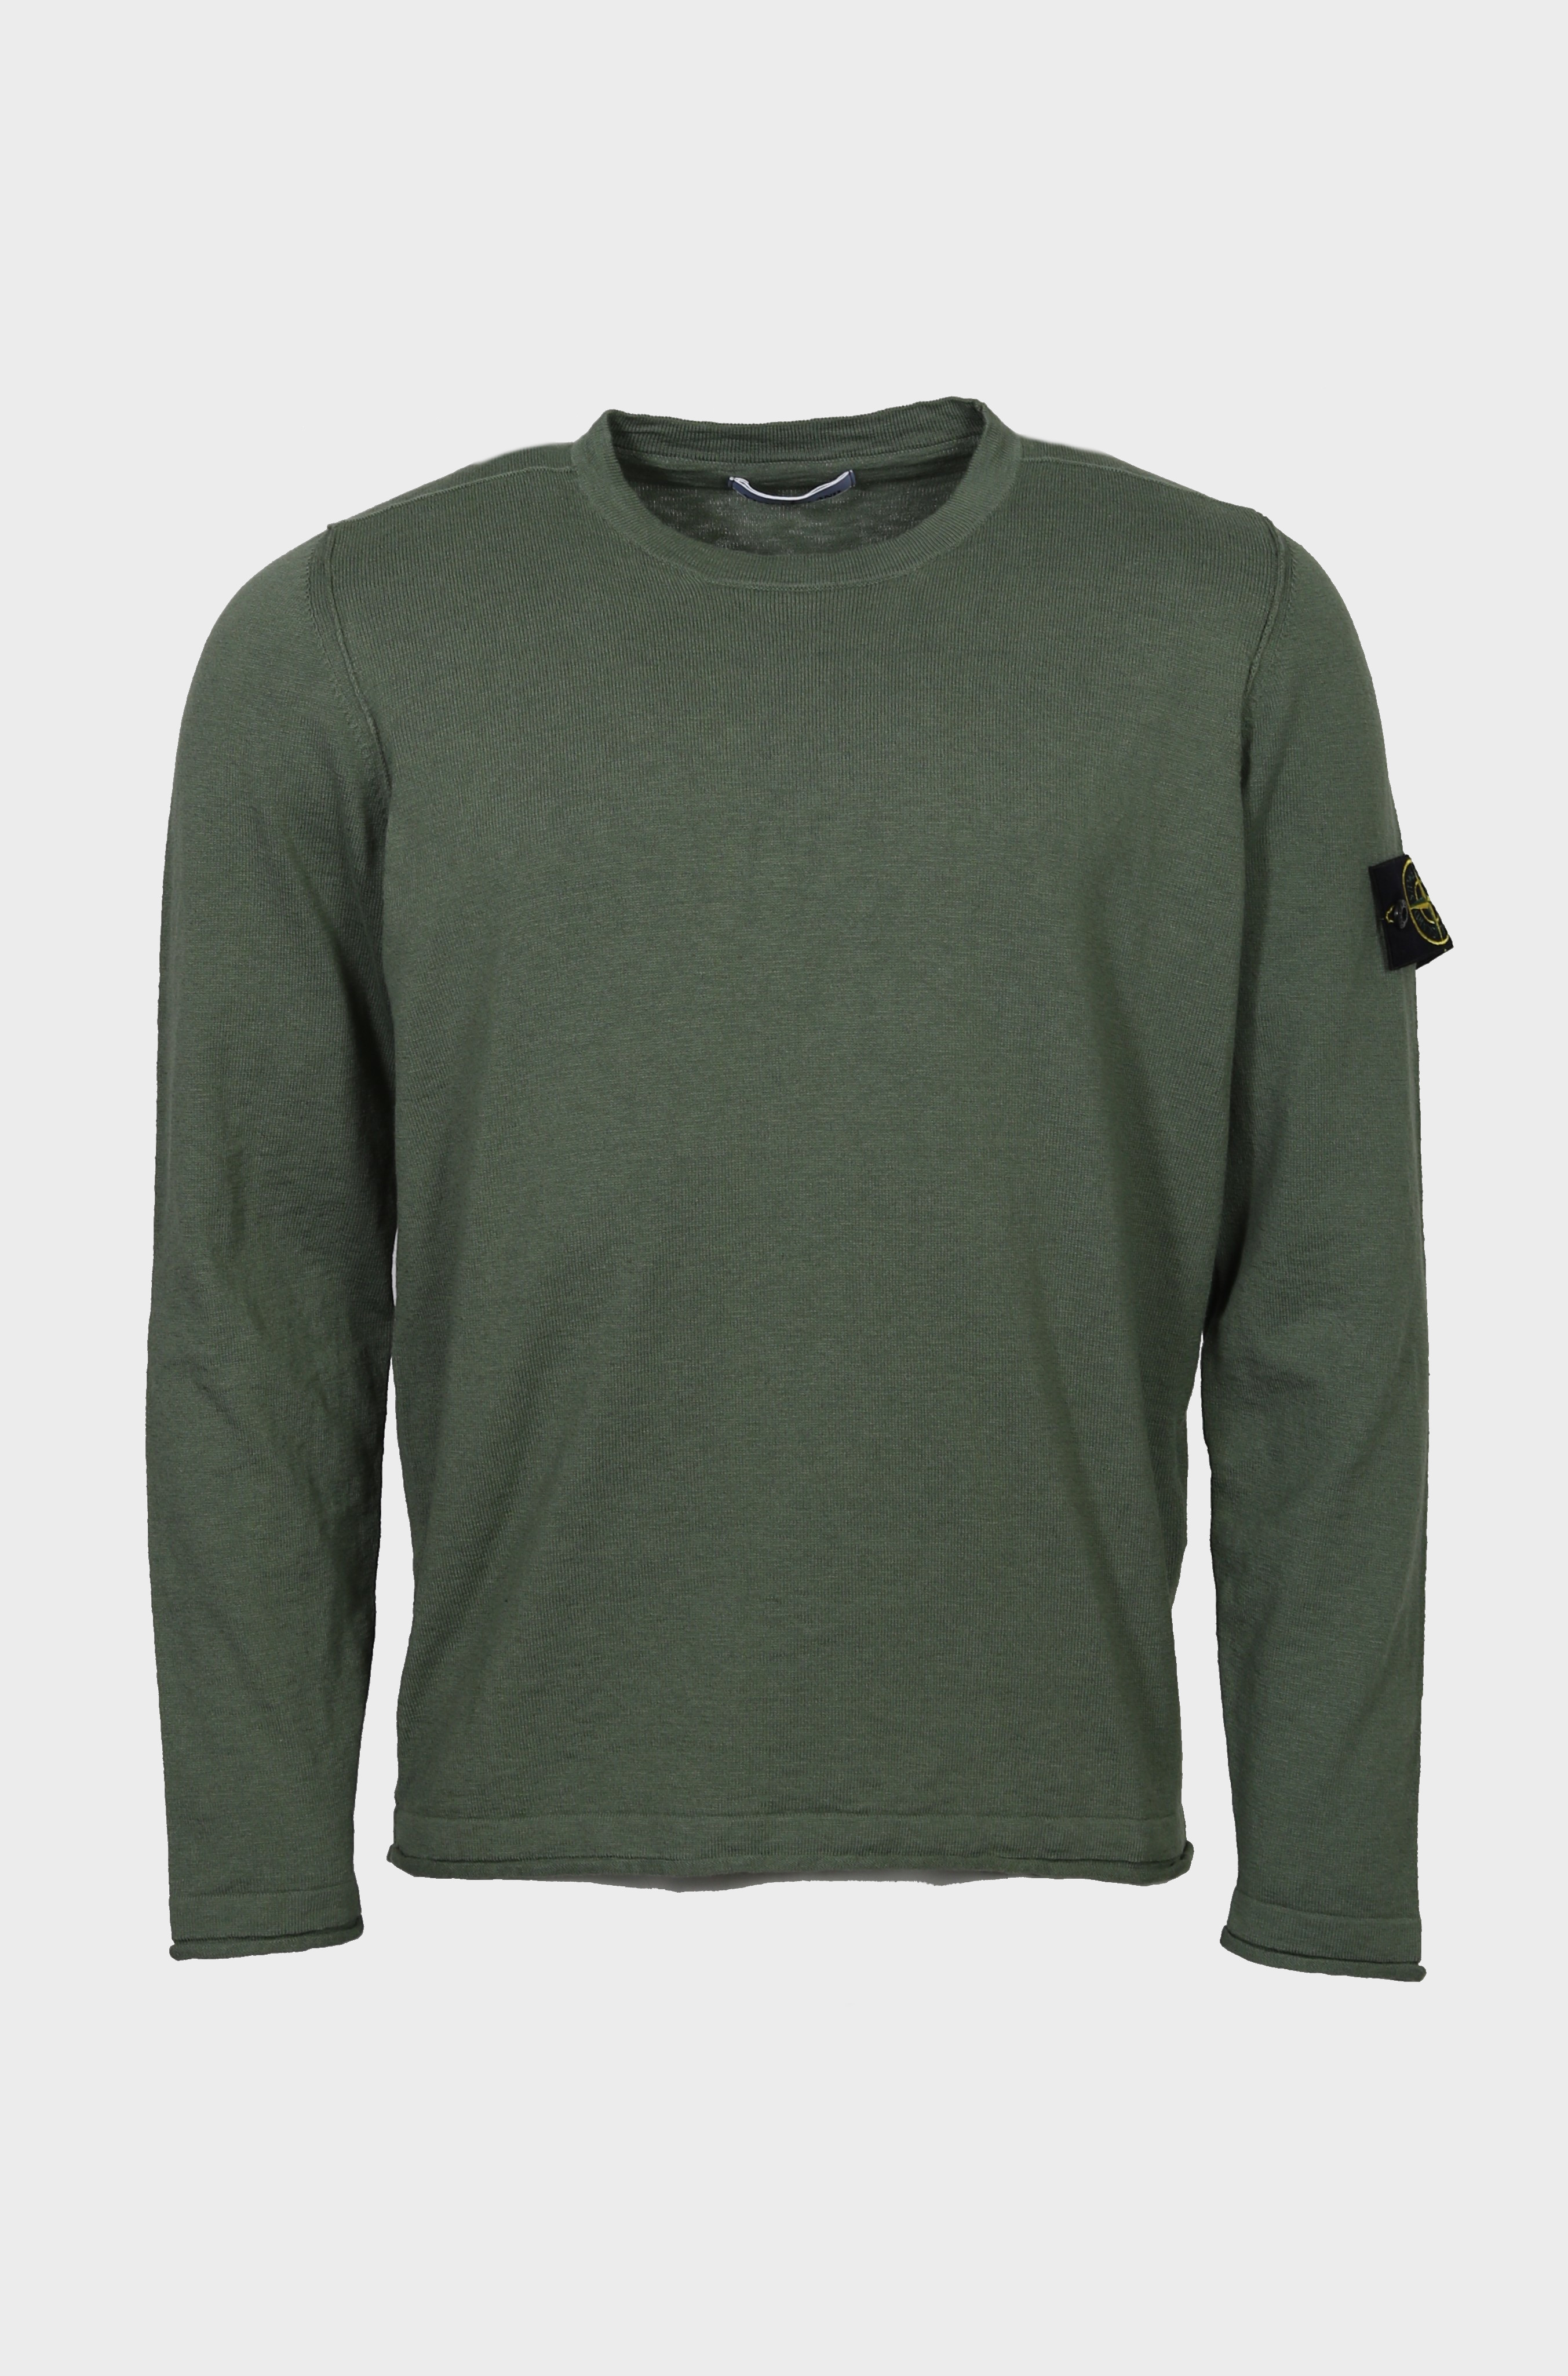 STONE ISLAND Summer Knit Pullover in Green L